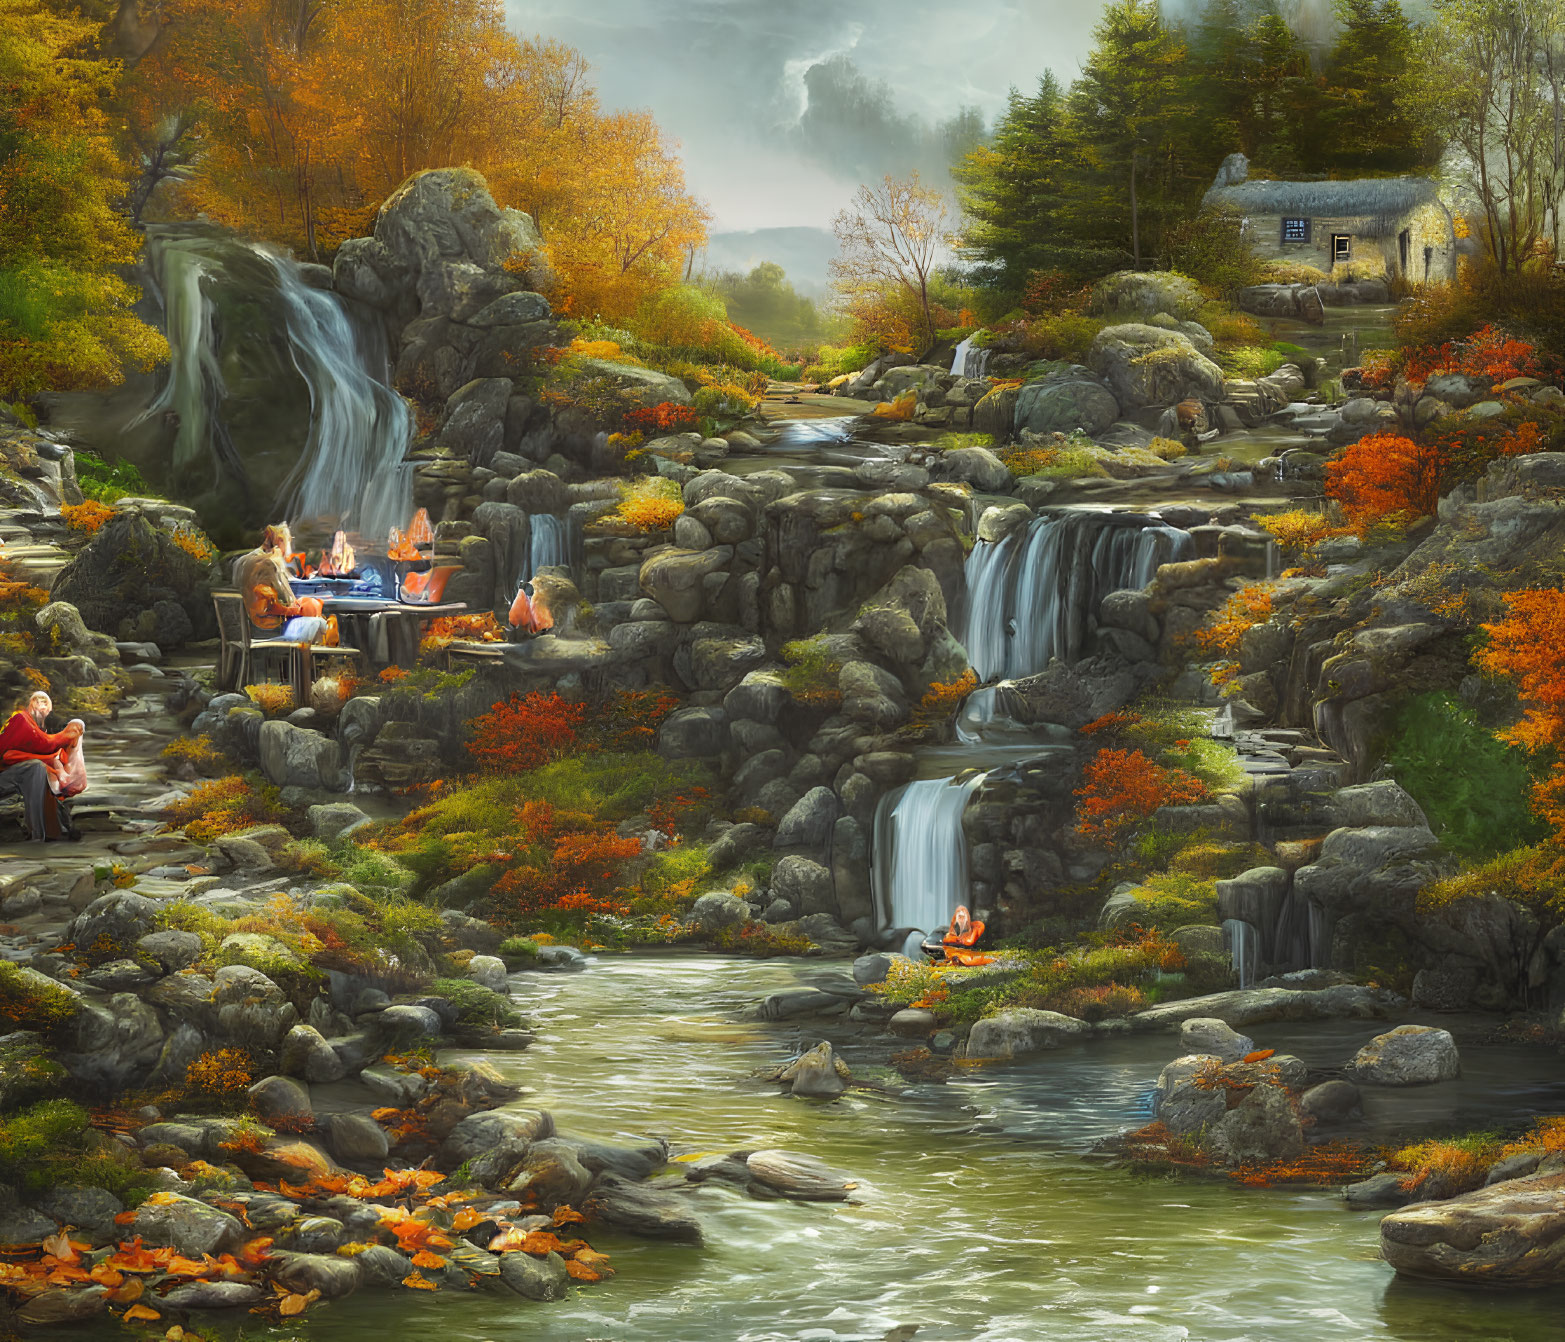 Tranquil autumn scene with waterfall, cottage, picnic, and fishing